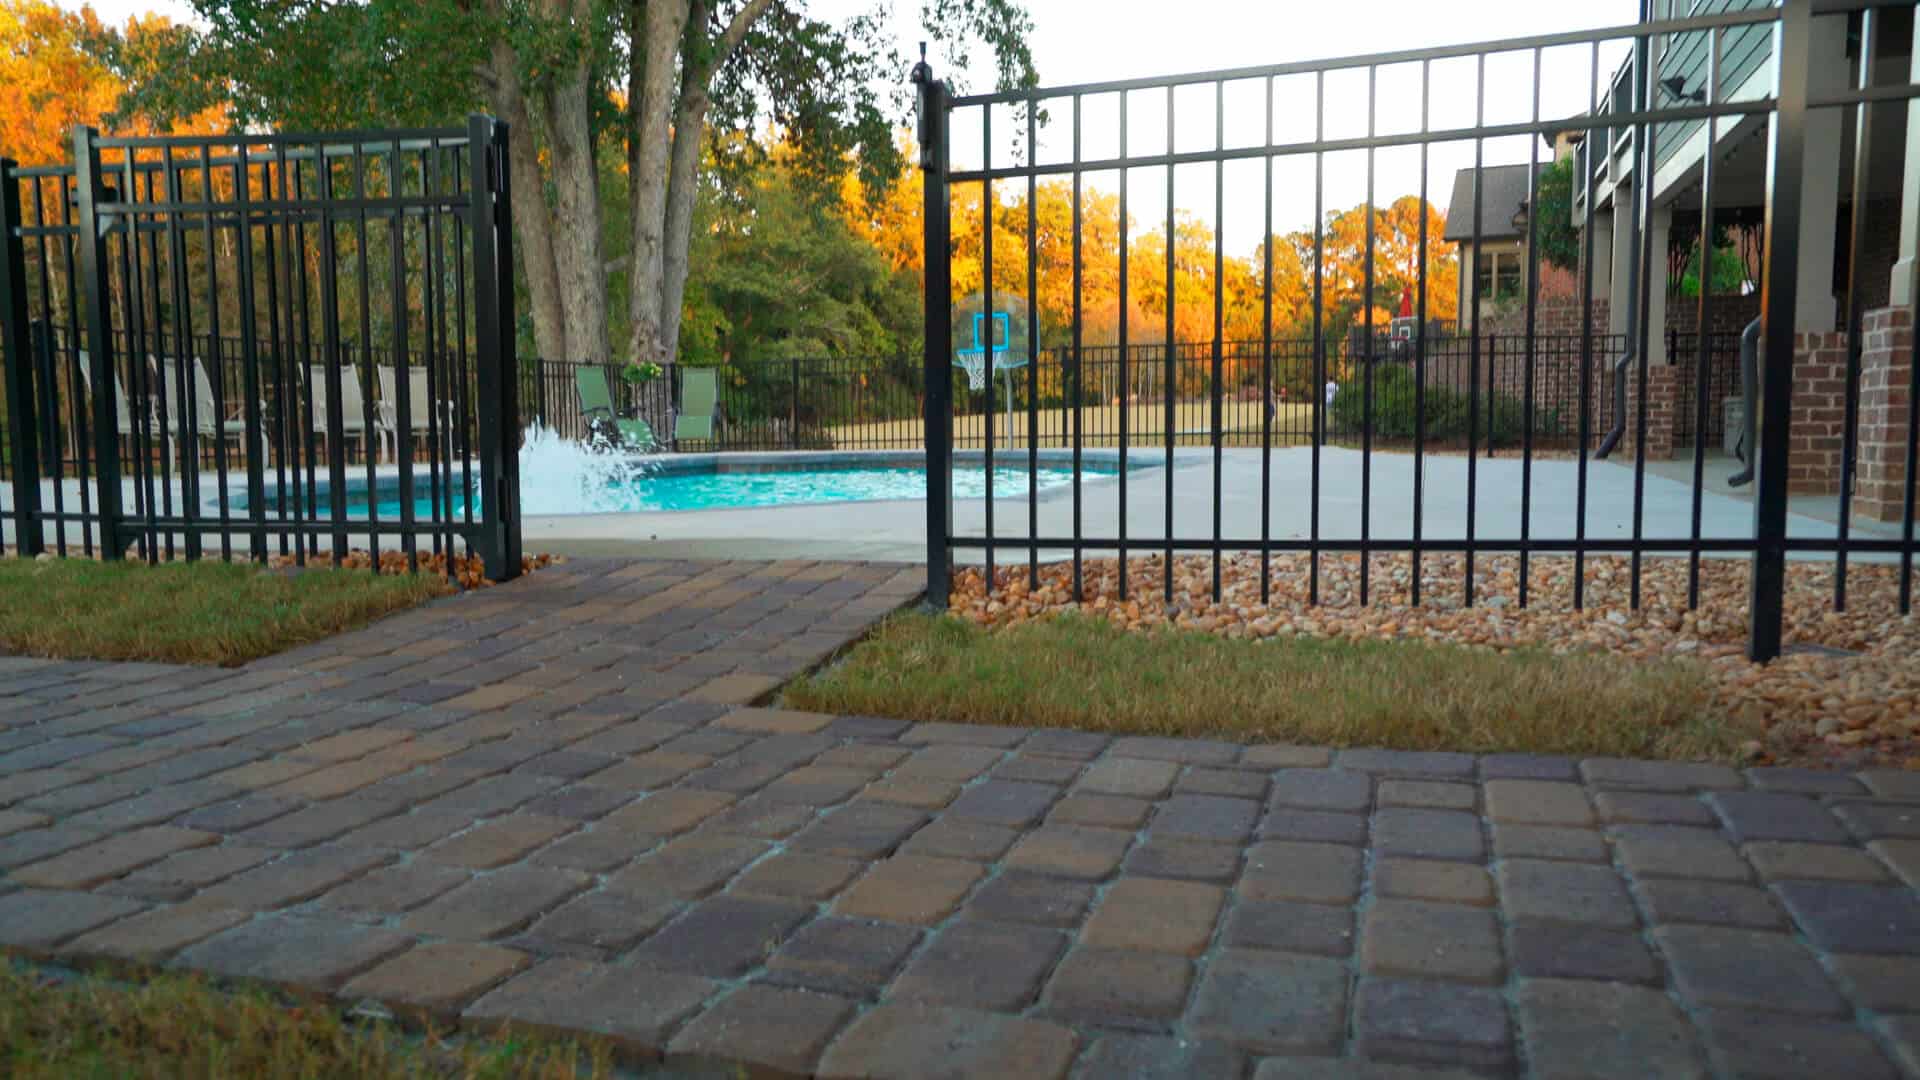 Paver walkway to a pool is a simple DIY project to connect your backyard spaces.